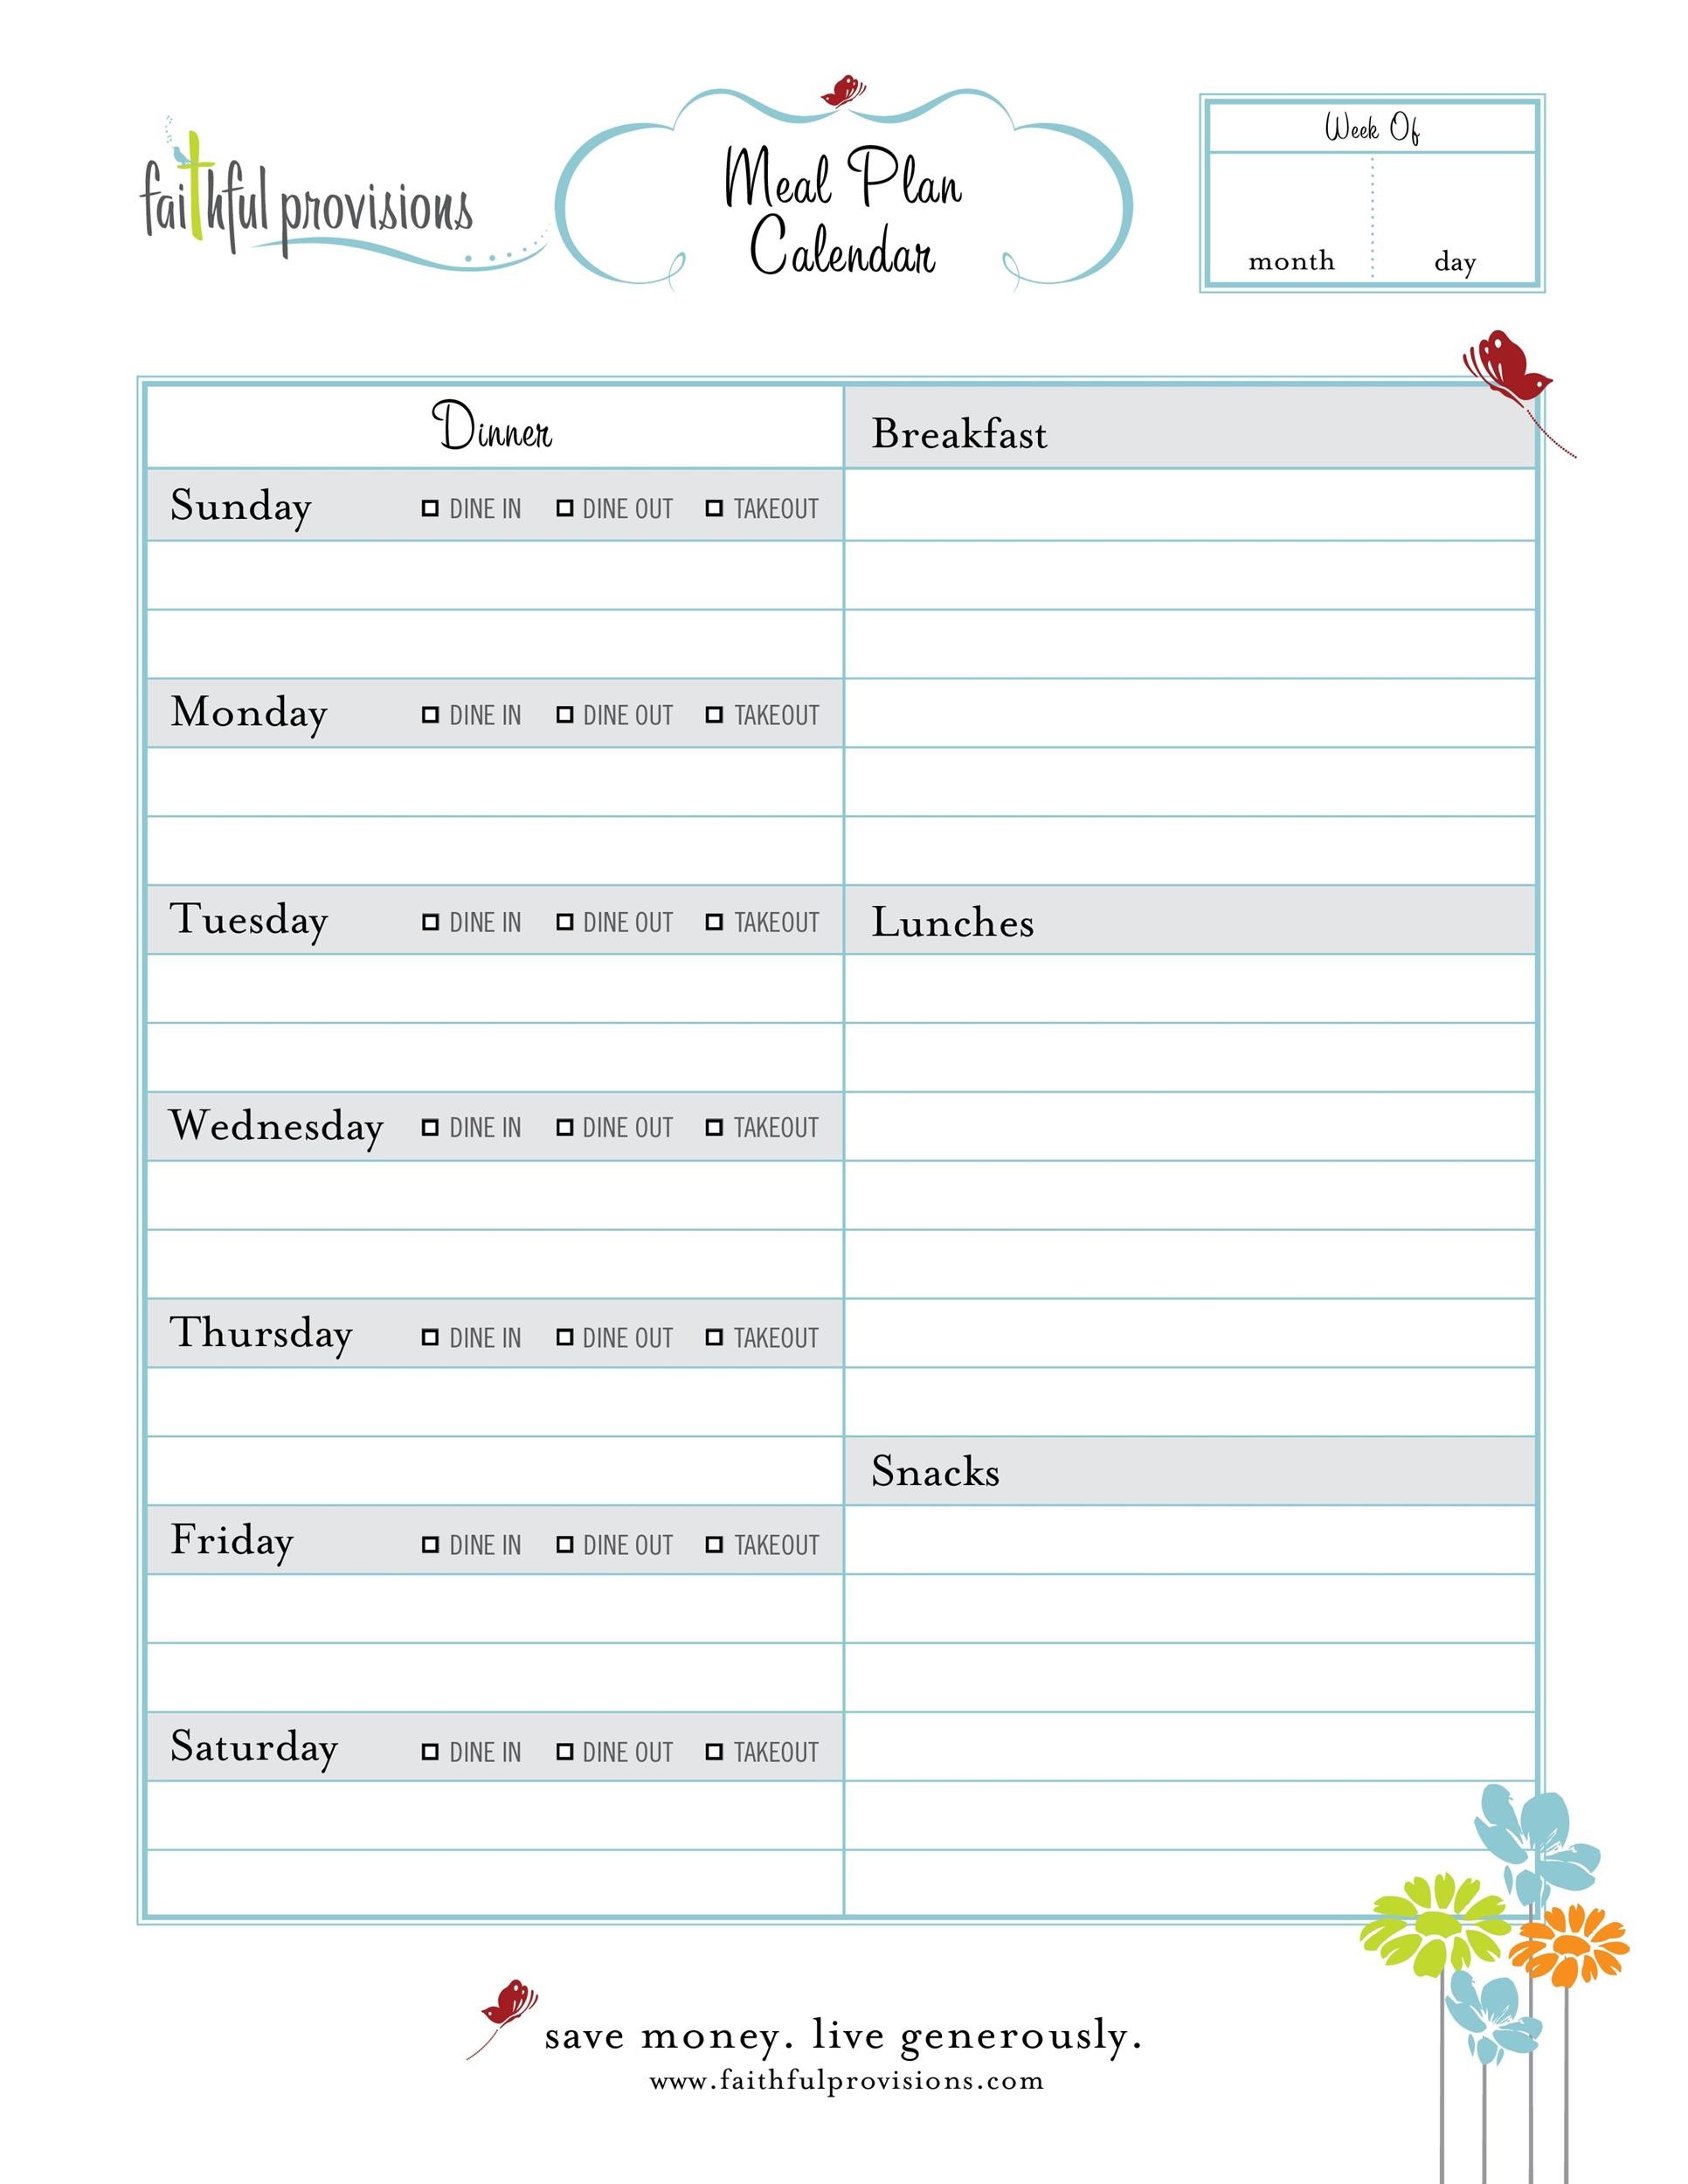 Free Meal Plan Template 05